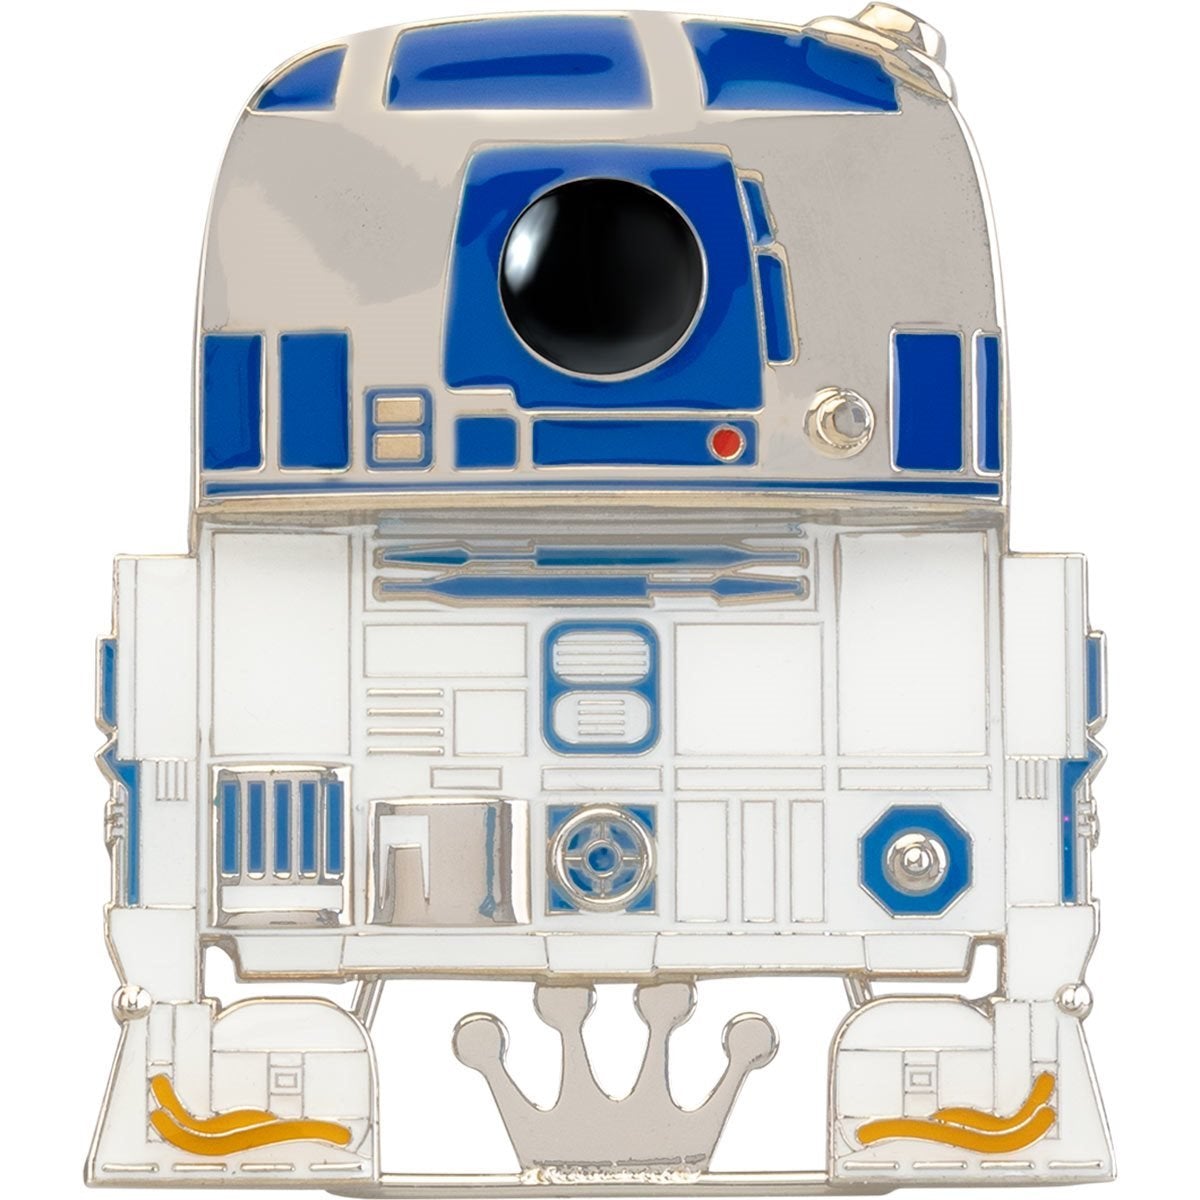 Funko Pop! Star Wars R2-D2 Large Enamel Pin #21.  Available at Blue Culture Tees!